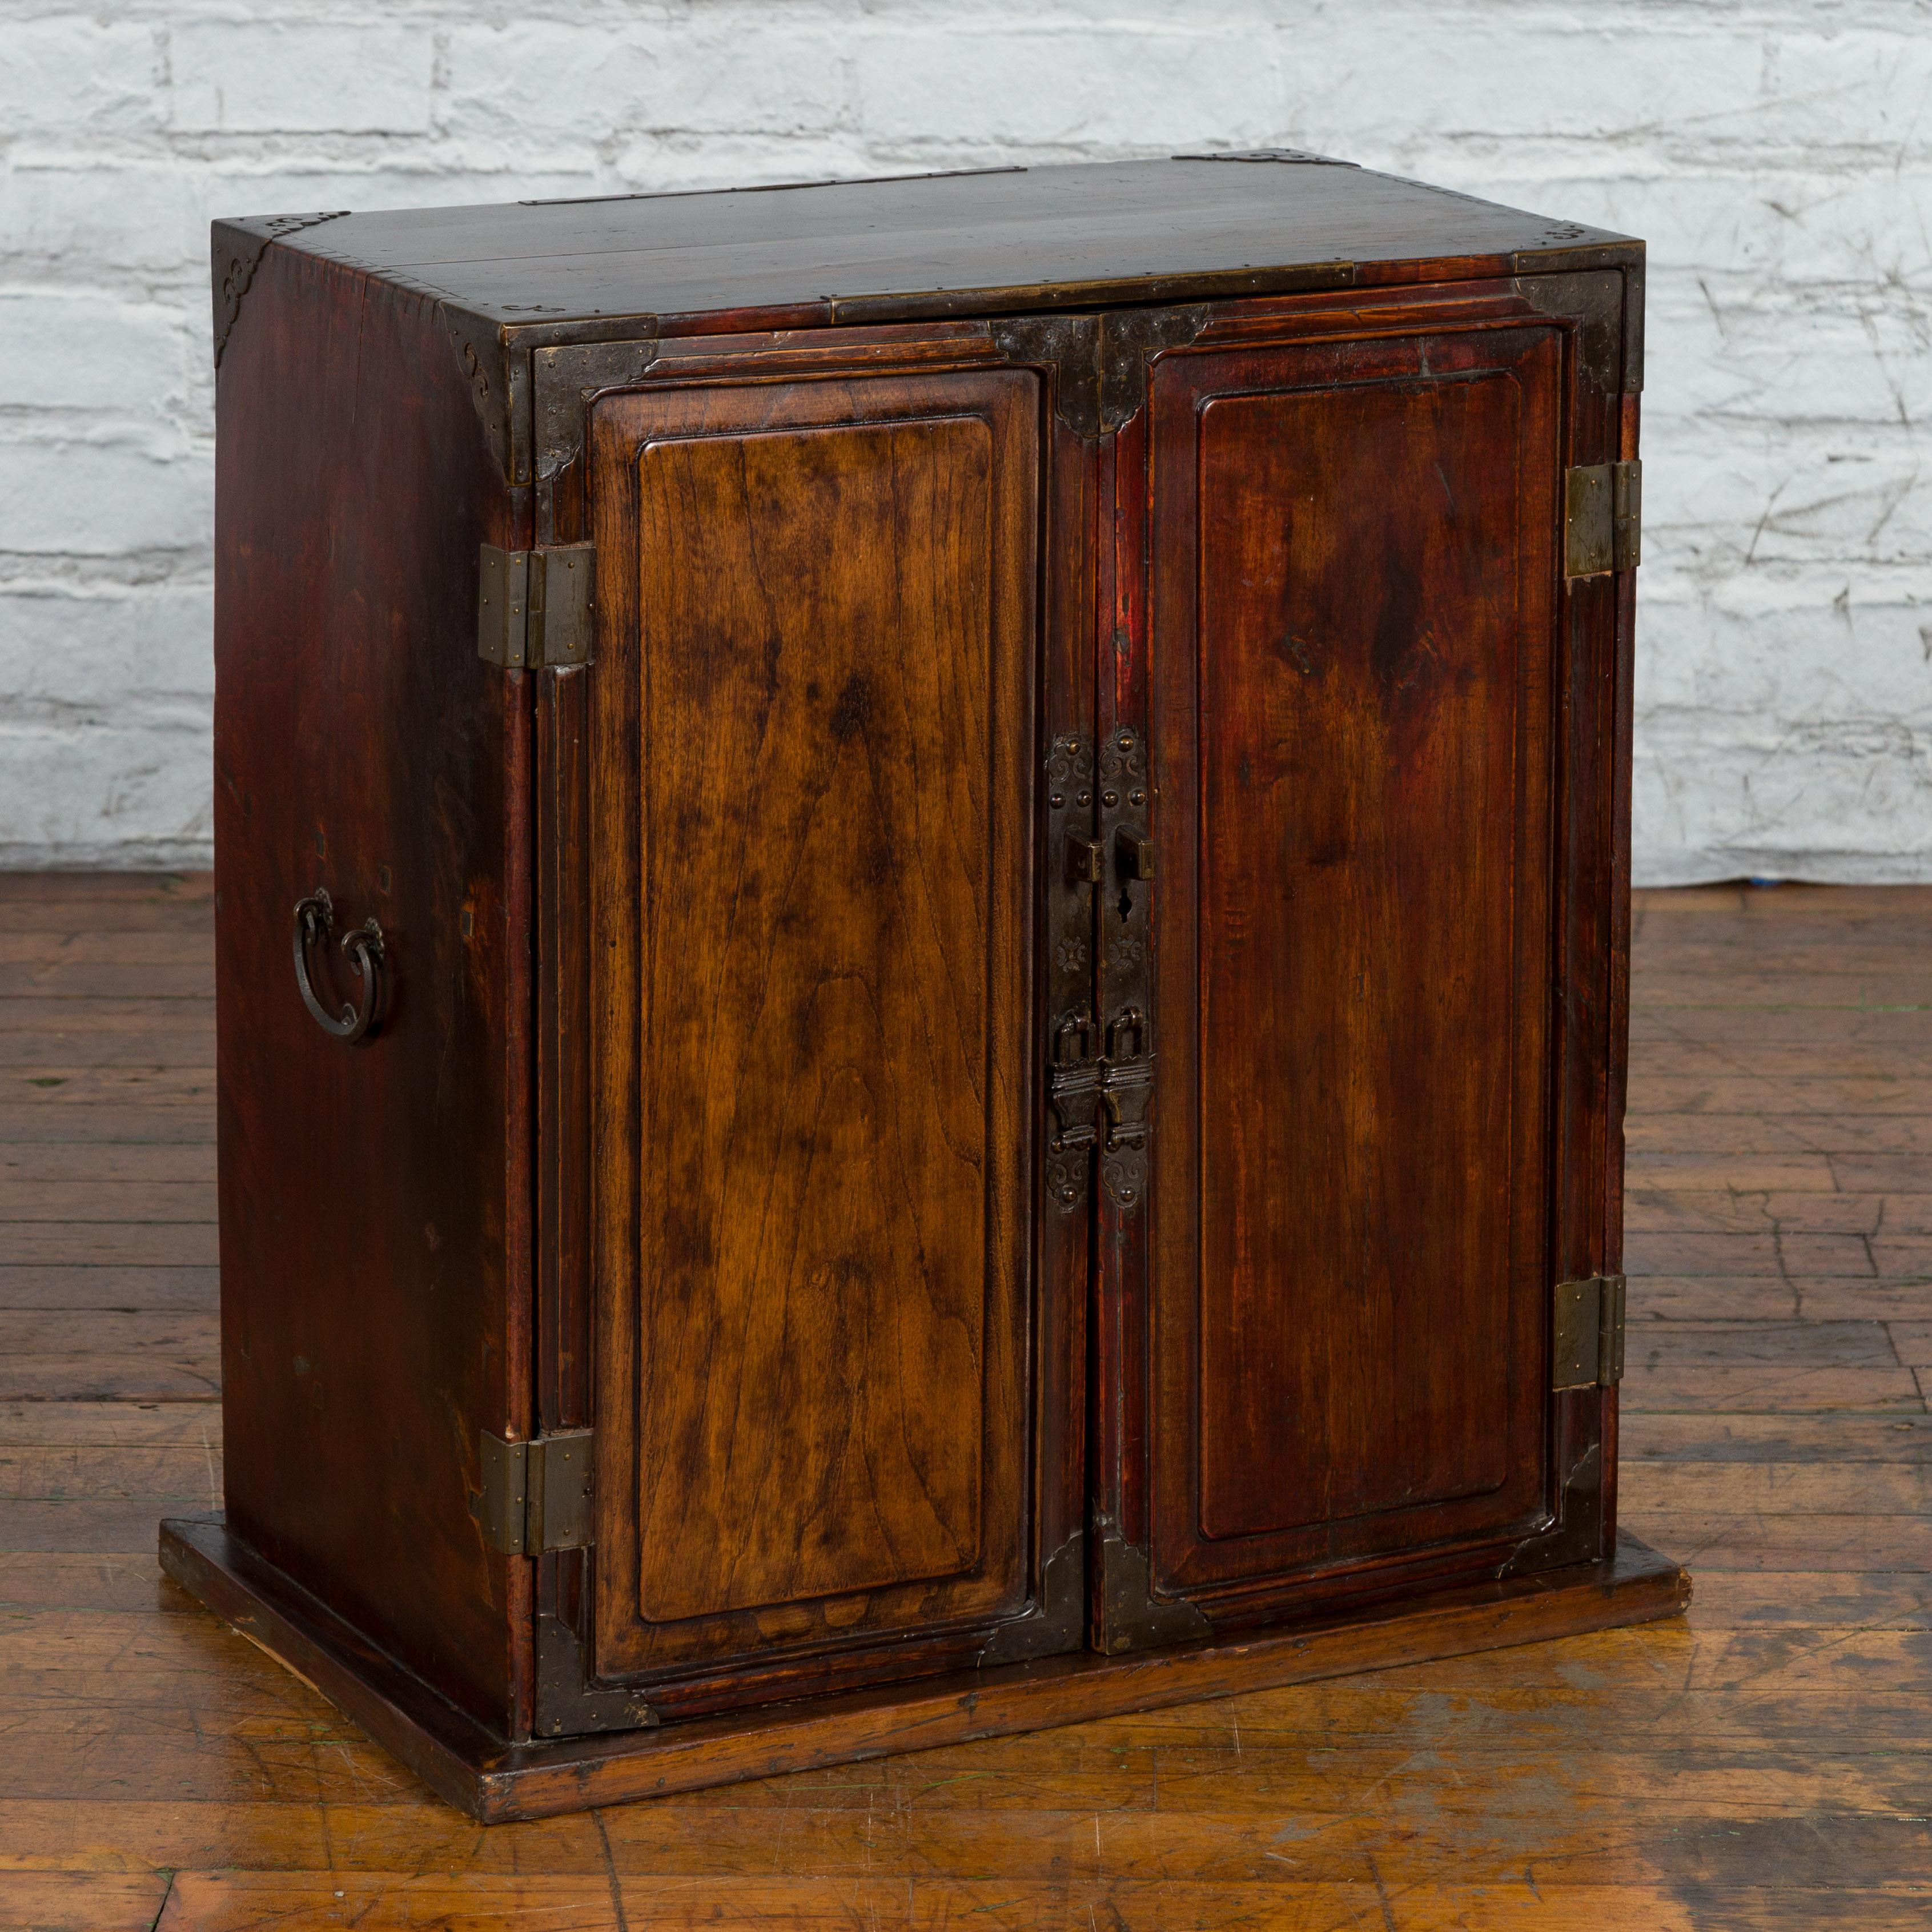 An antique Chinese Qing Dynasty period bedside cabinet from the 19th century, with two doors and brass hardware. Created in China during the Qing Dynasty period, this bedside cabinet features a rectangular planked top adorned with ornate brass